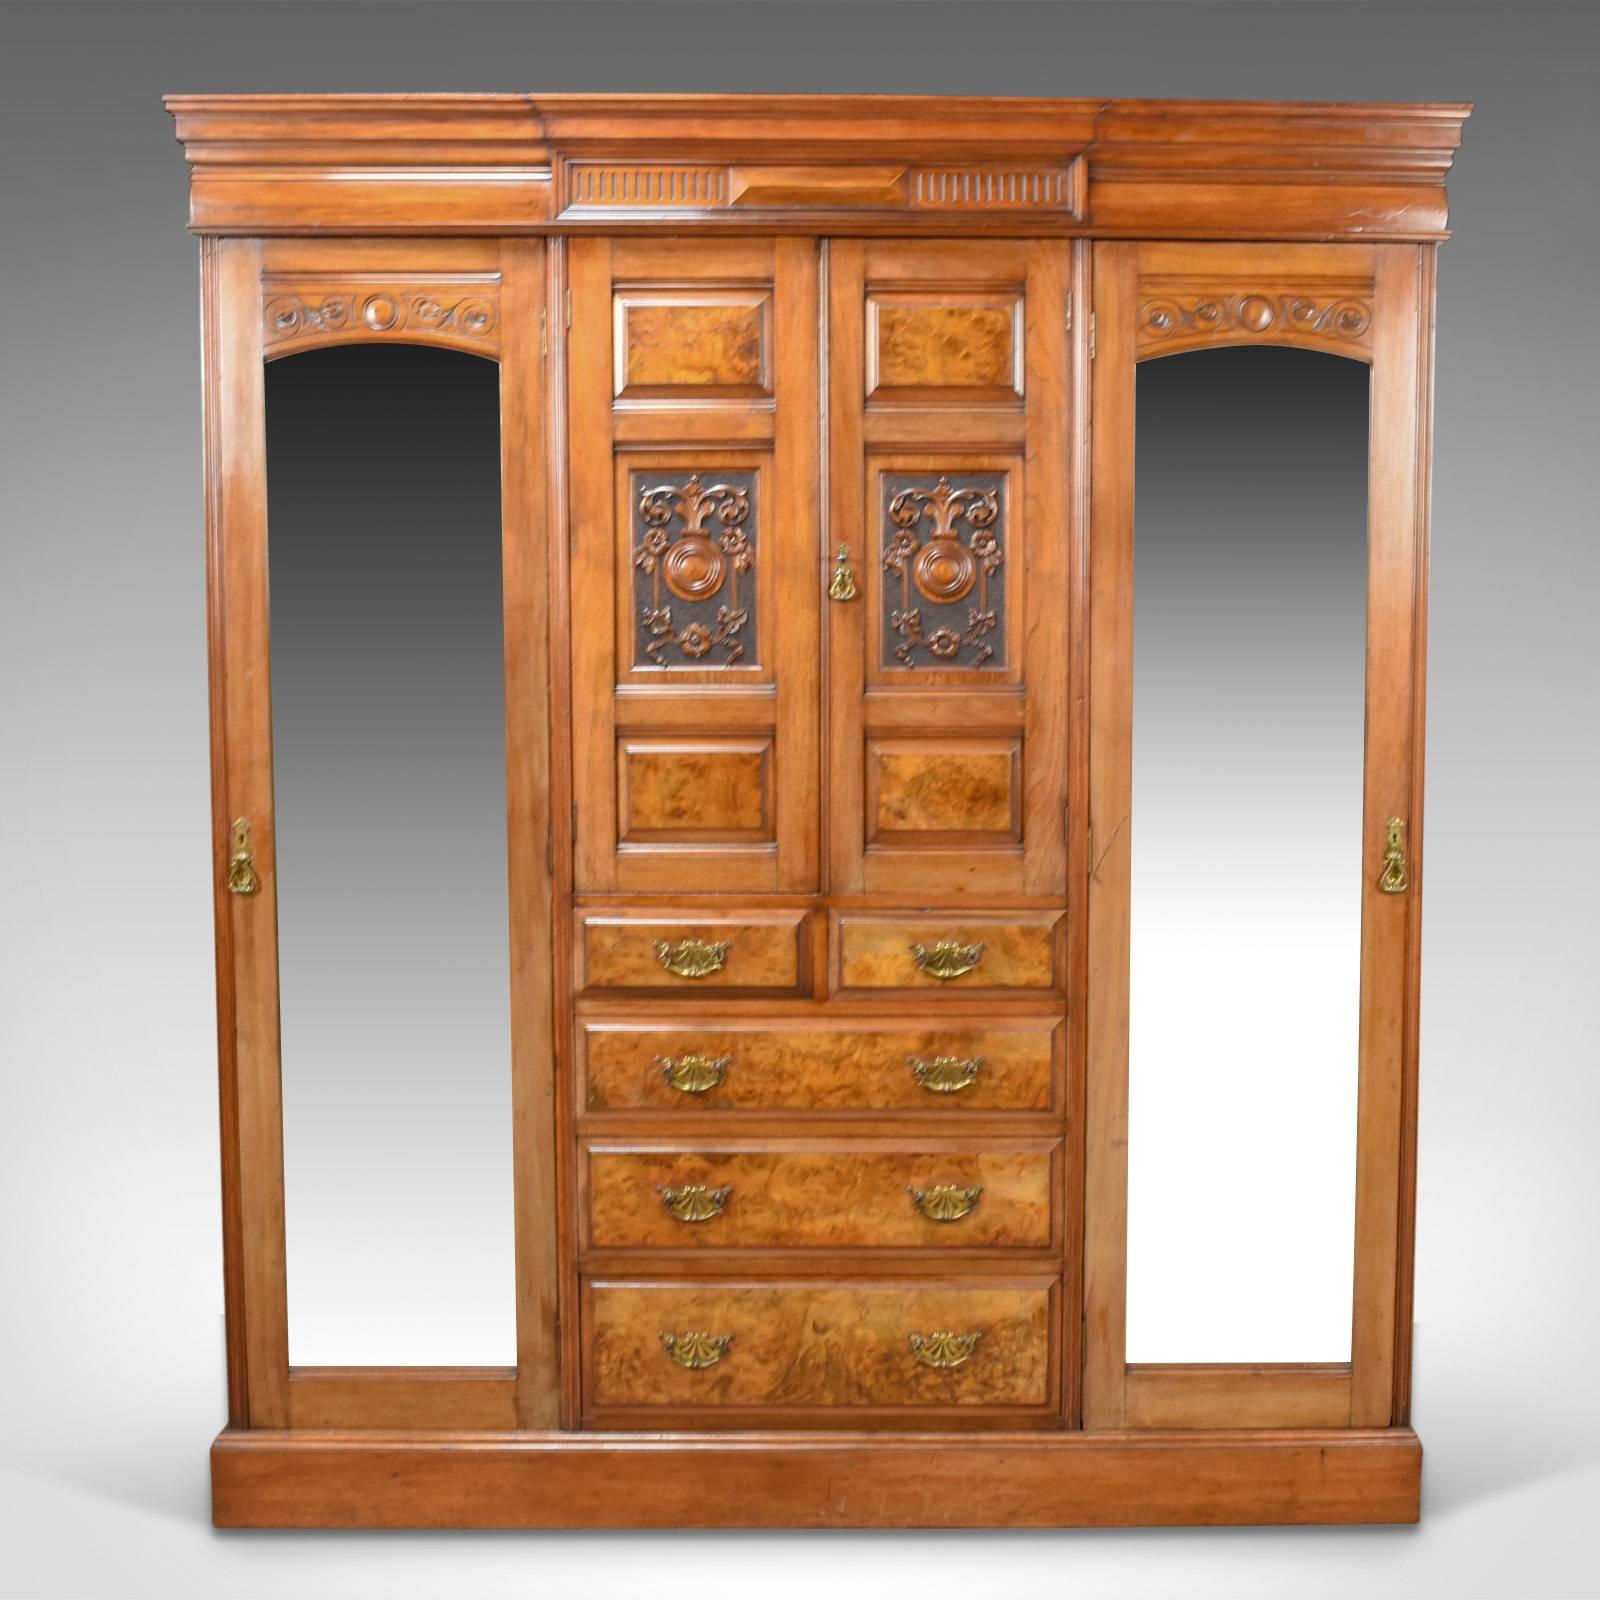 This is an antique wardrobe in English walnut, a compactum dating to the Edwardian period, circa 1910.

Of quality craftsmanship offering generous storage
English walnut with burr walnut drawers fronts and panels
Good color throughout with a